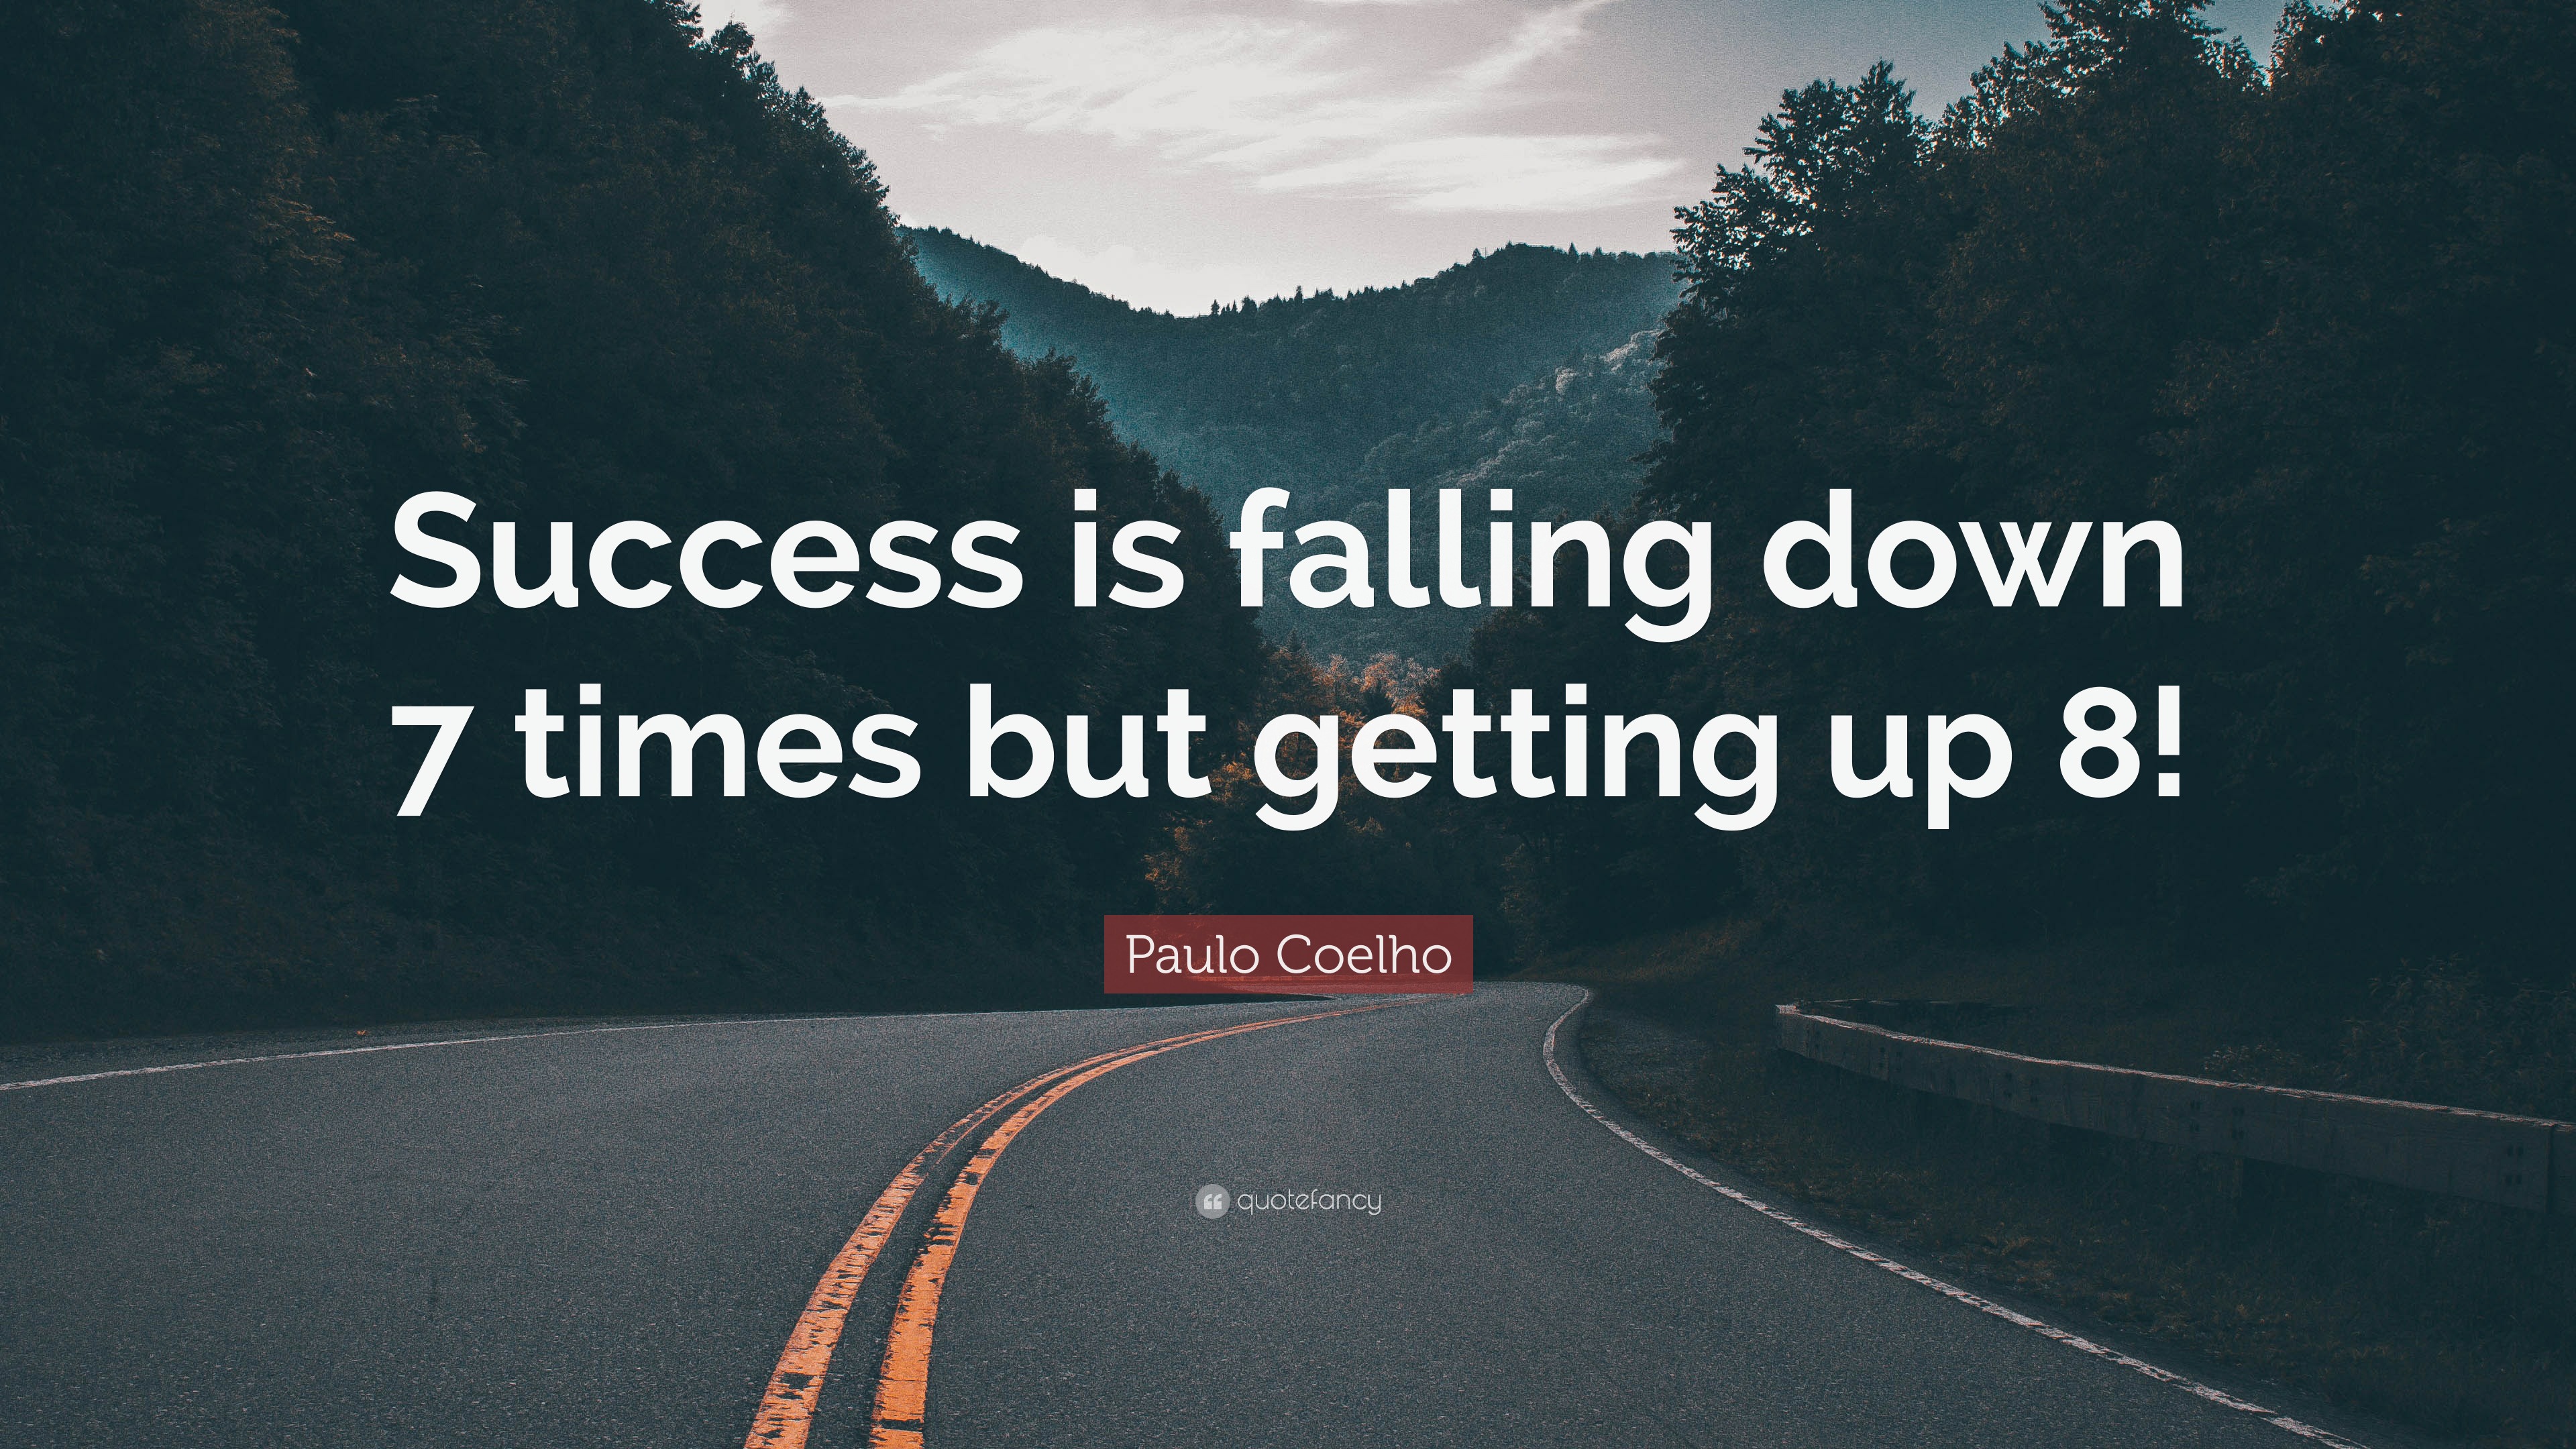 Paulo Coelho Quote: "Success is falling down 7 times but getting up 8!...